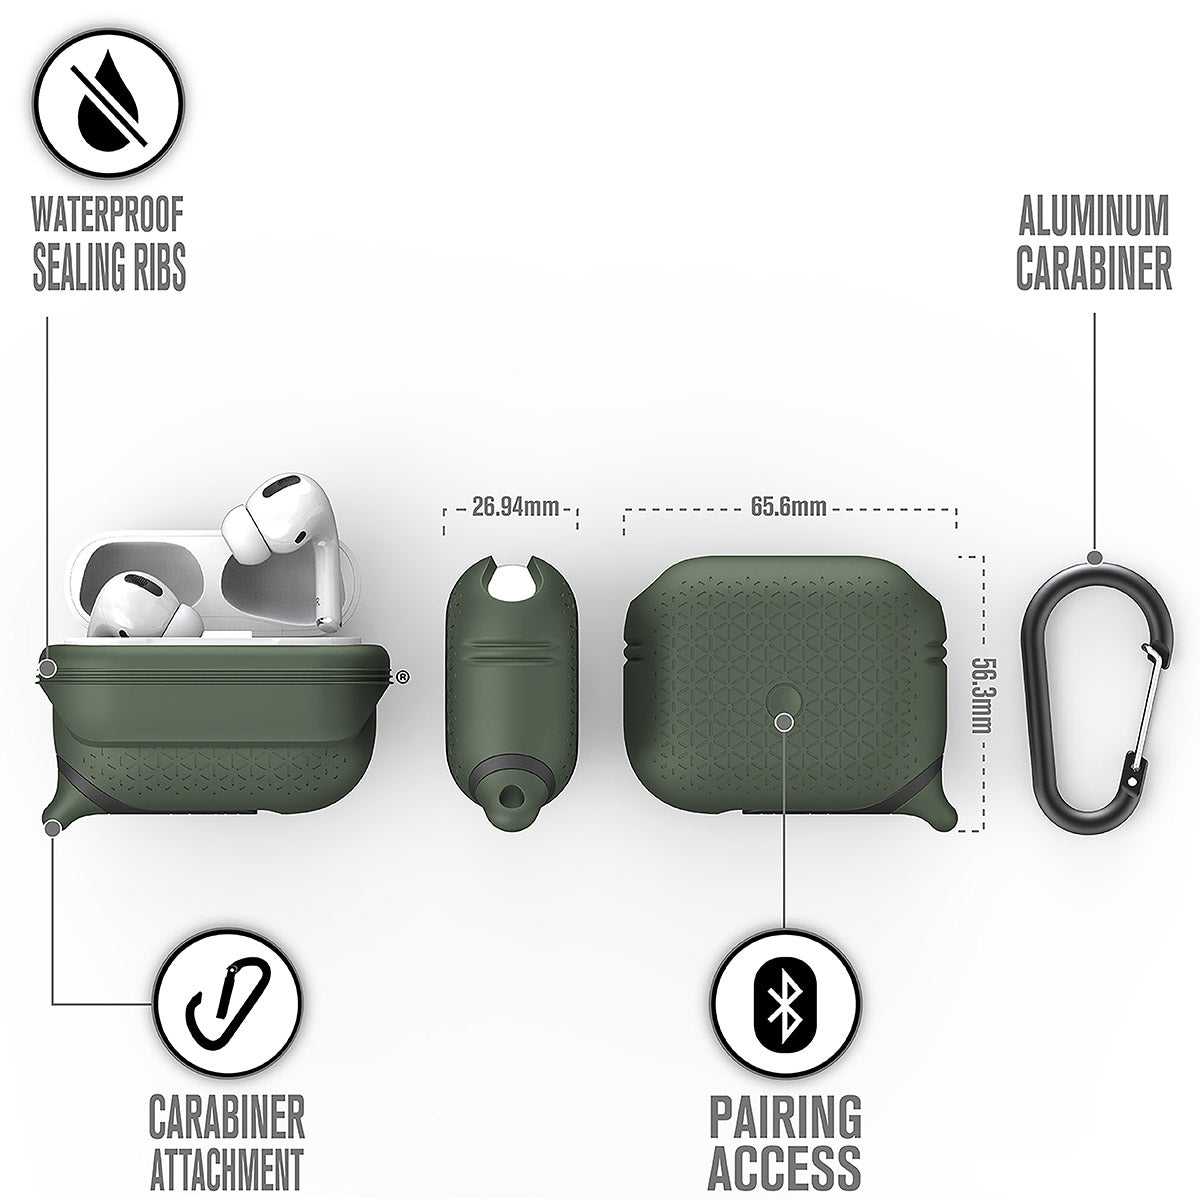 catalyst airpods pro gen 2 1 waterproof case carabiner premium edition different views showing the sealing ribs carabiner attachment loop and pairing access text reads waterproof sealing ribs aluminum carabiner carabiner attachment pairing access